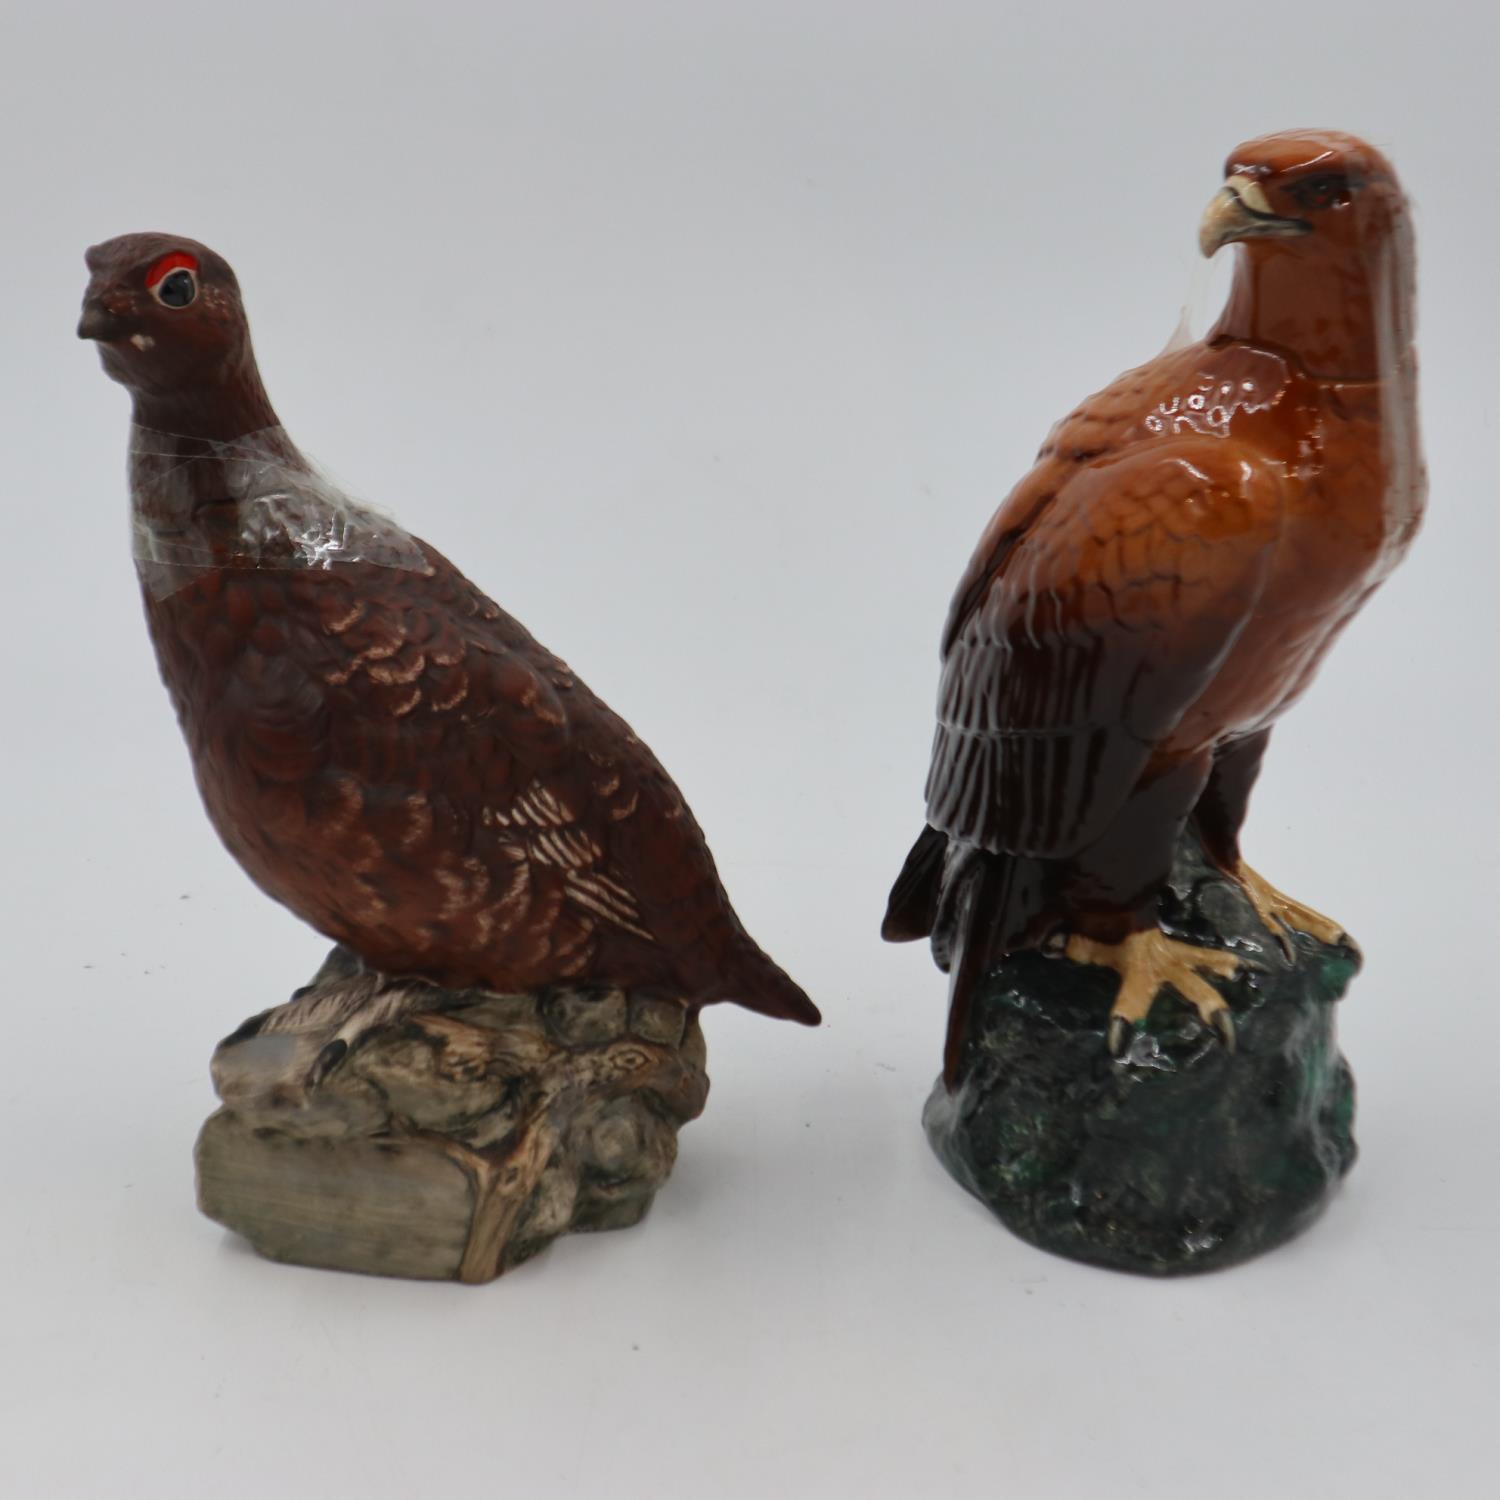 Two Royal Doulton bird decanters, seconds quality, H: 27 cm. no cracks or chips. UK P&P Group 3 (£